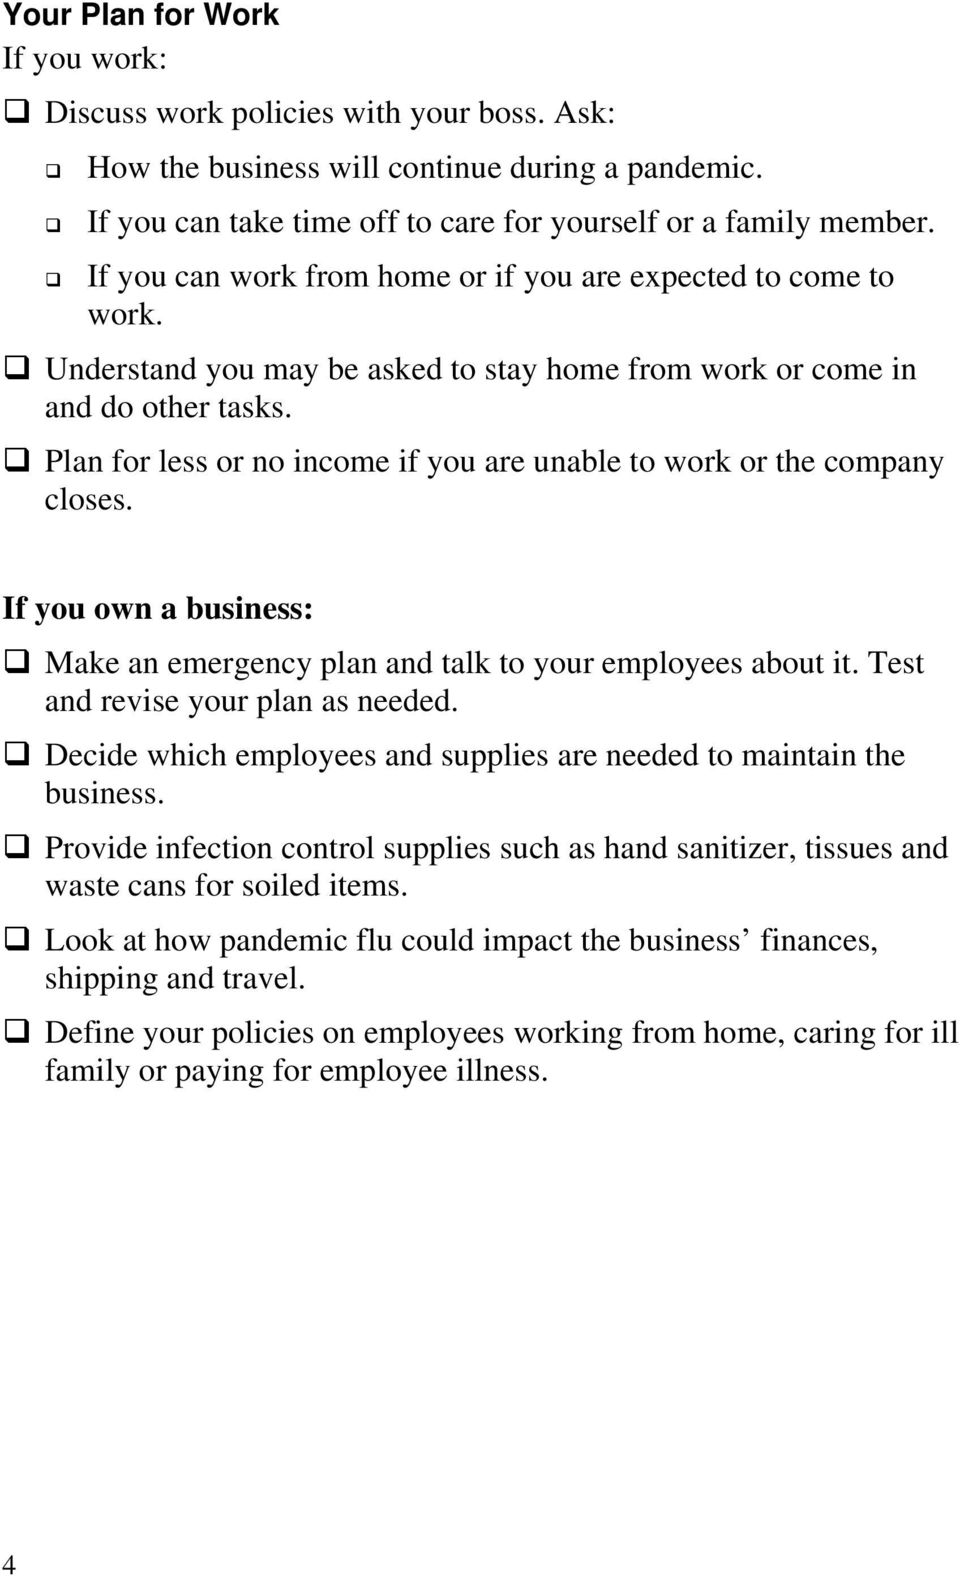 Plan for less or no income if you are unable to work or the company closes. If you own a business: Make an emergency plan and talk to your employees about it. Test and revise your plan as needed.